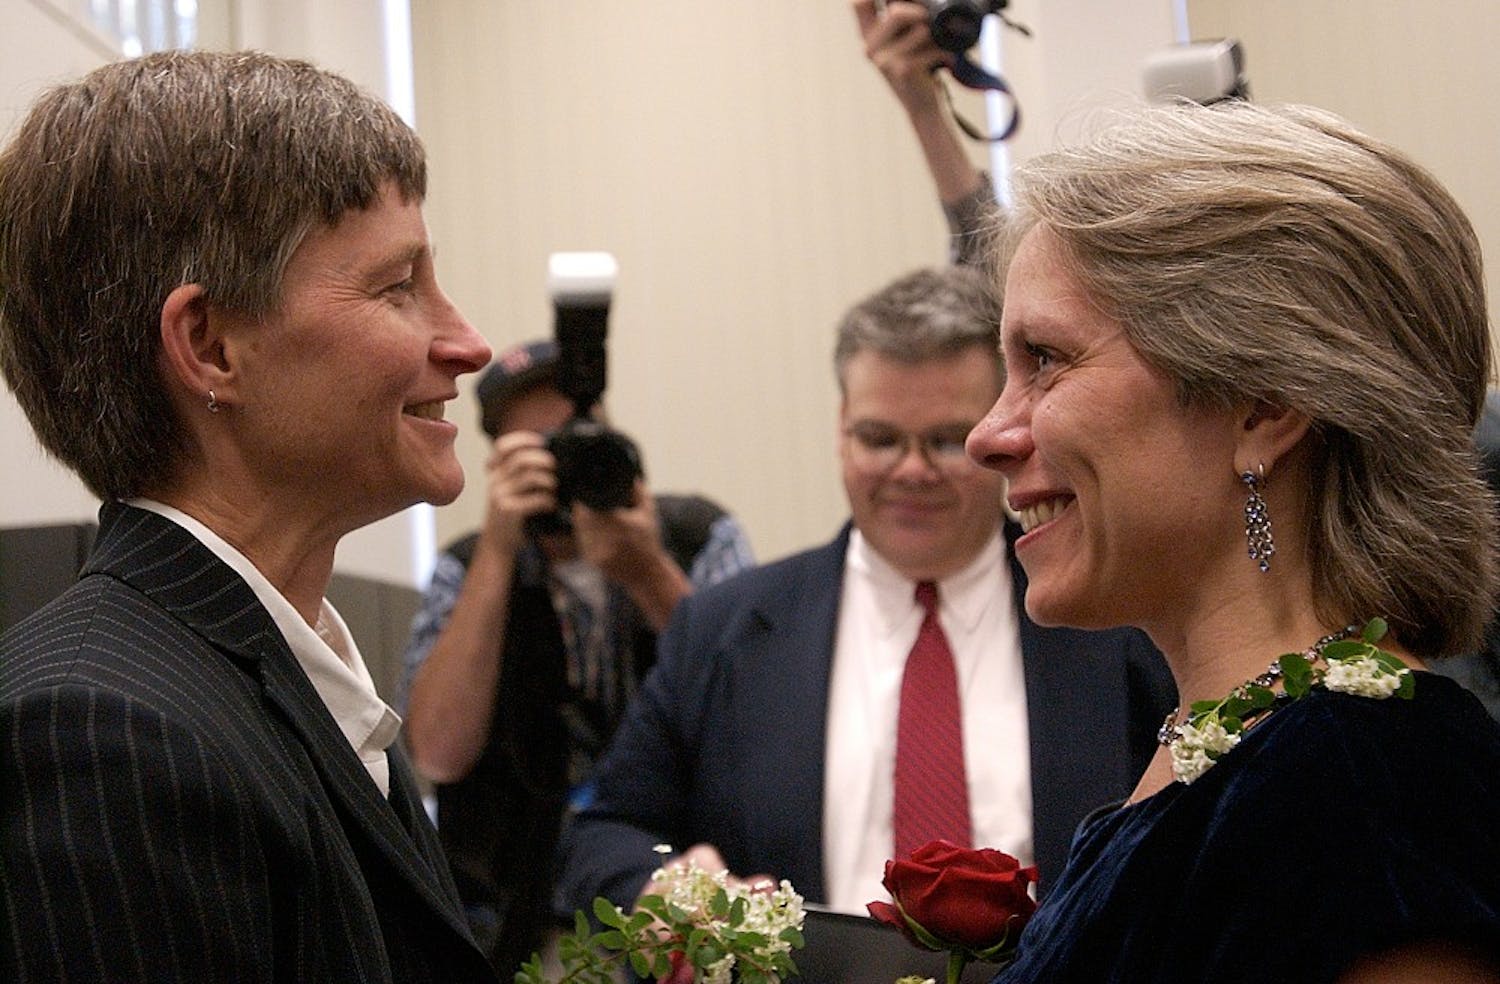 	Robyn Ochs (right) and her partner Peg proudly became one of the first homosexual couples to get married when Massachusetts legalized gay marriage in 2004.